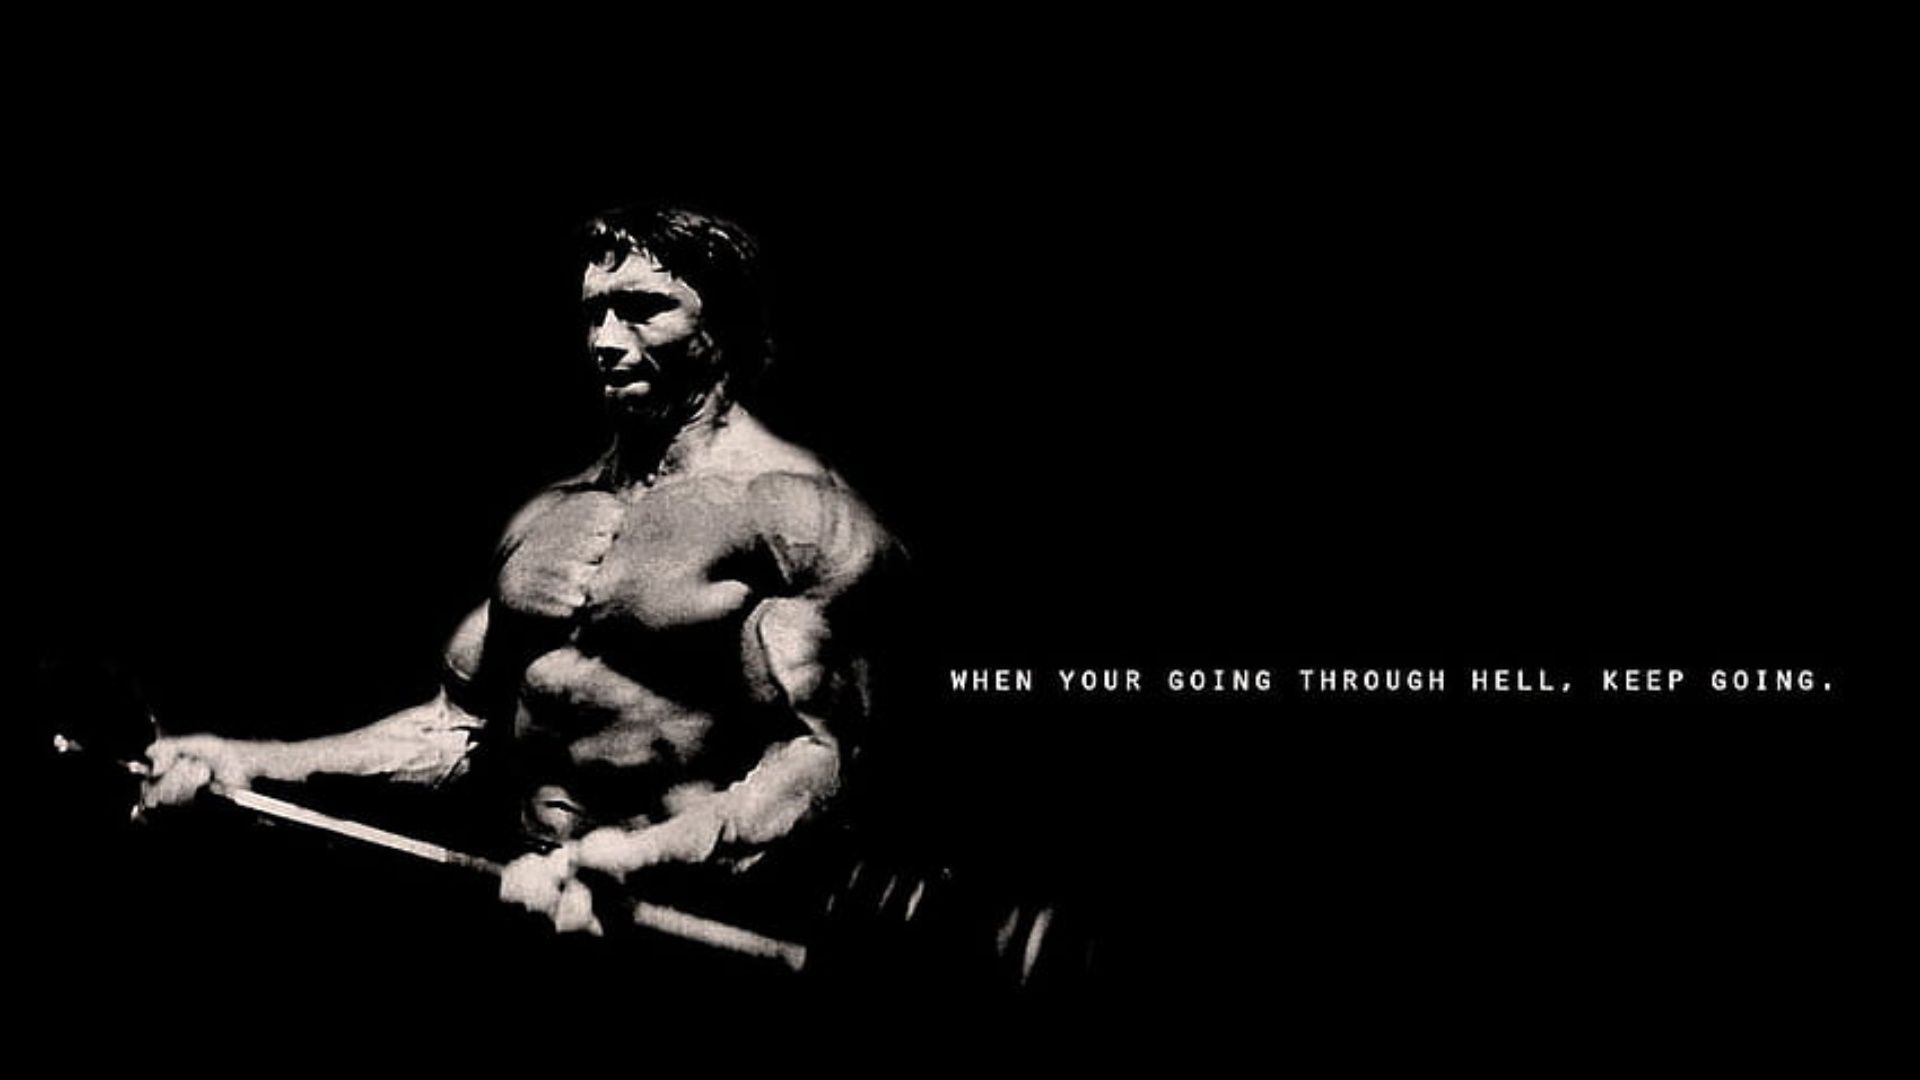 The bodybuilding wallpaper of person - Gym